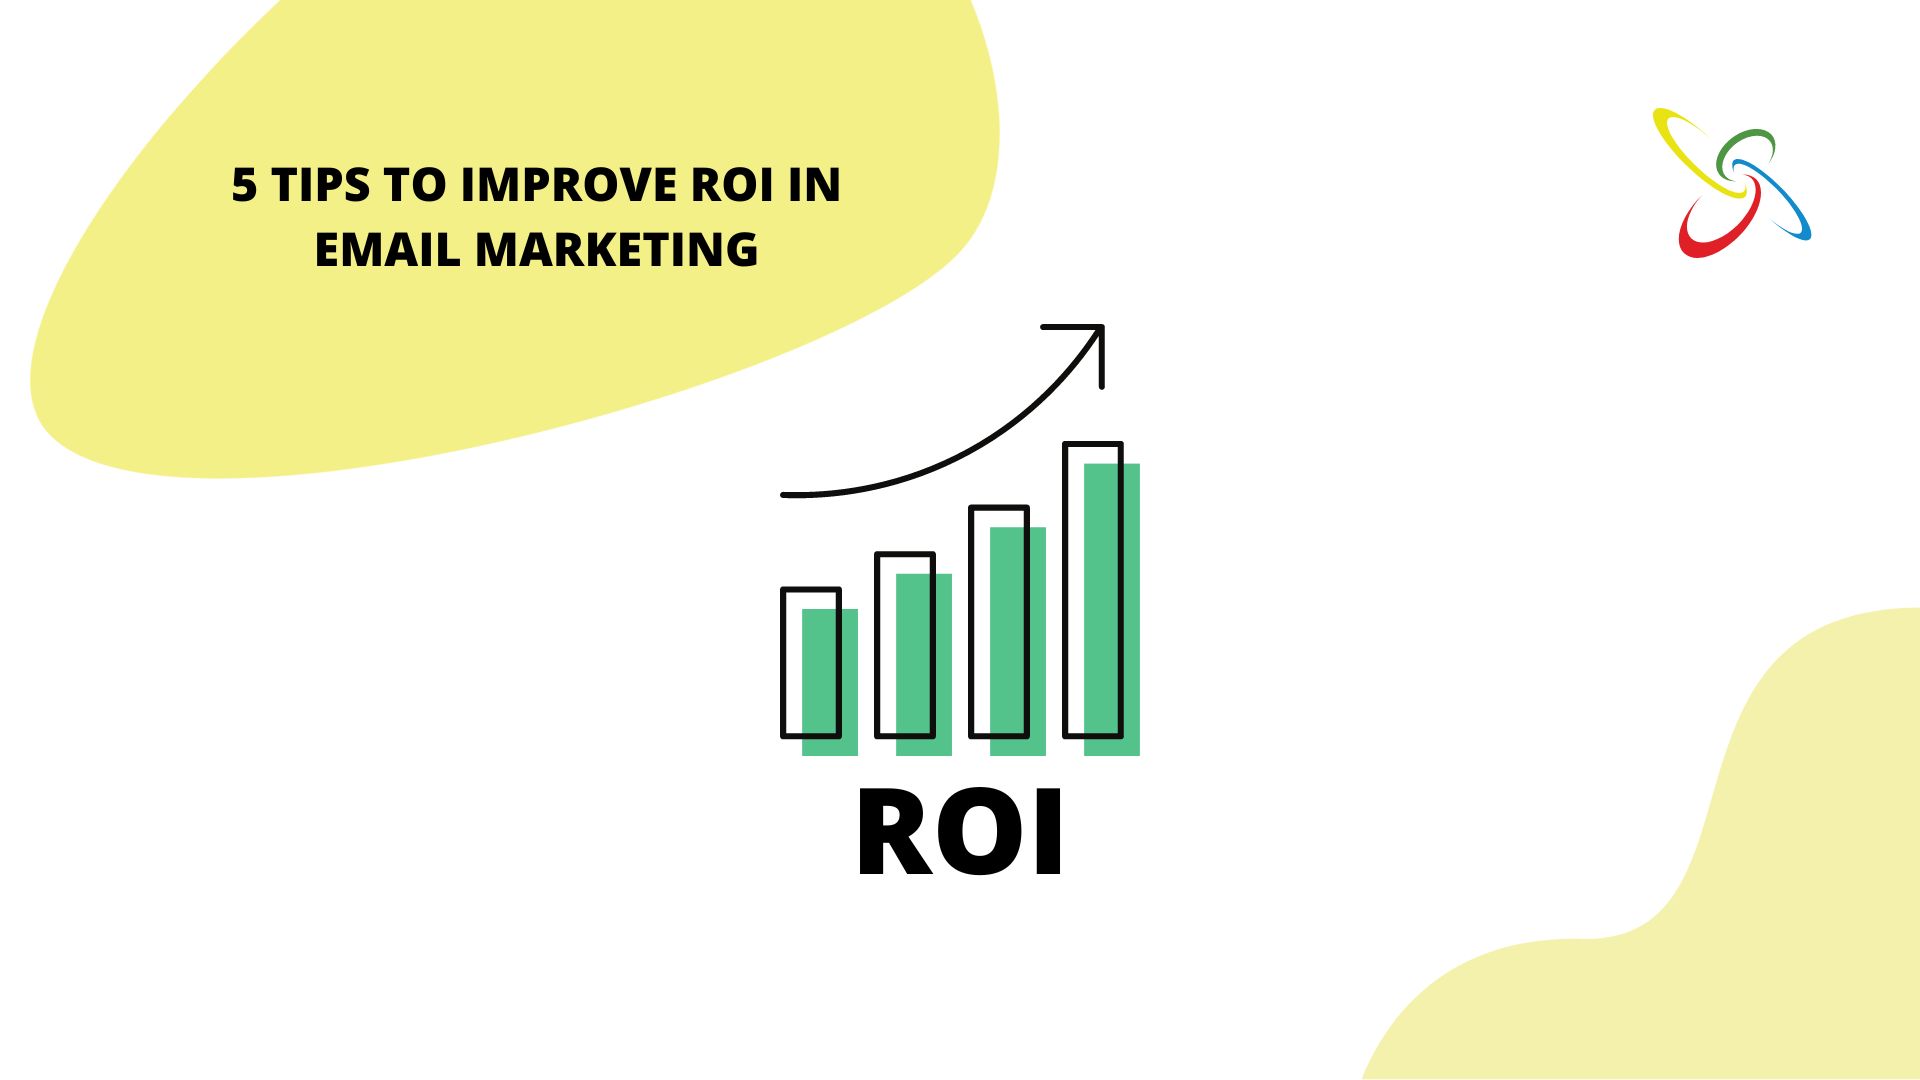 5 tips to improve ROI in email marketing